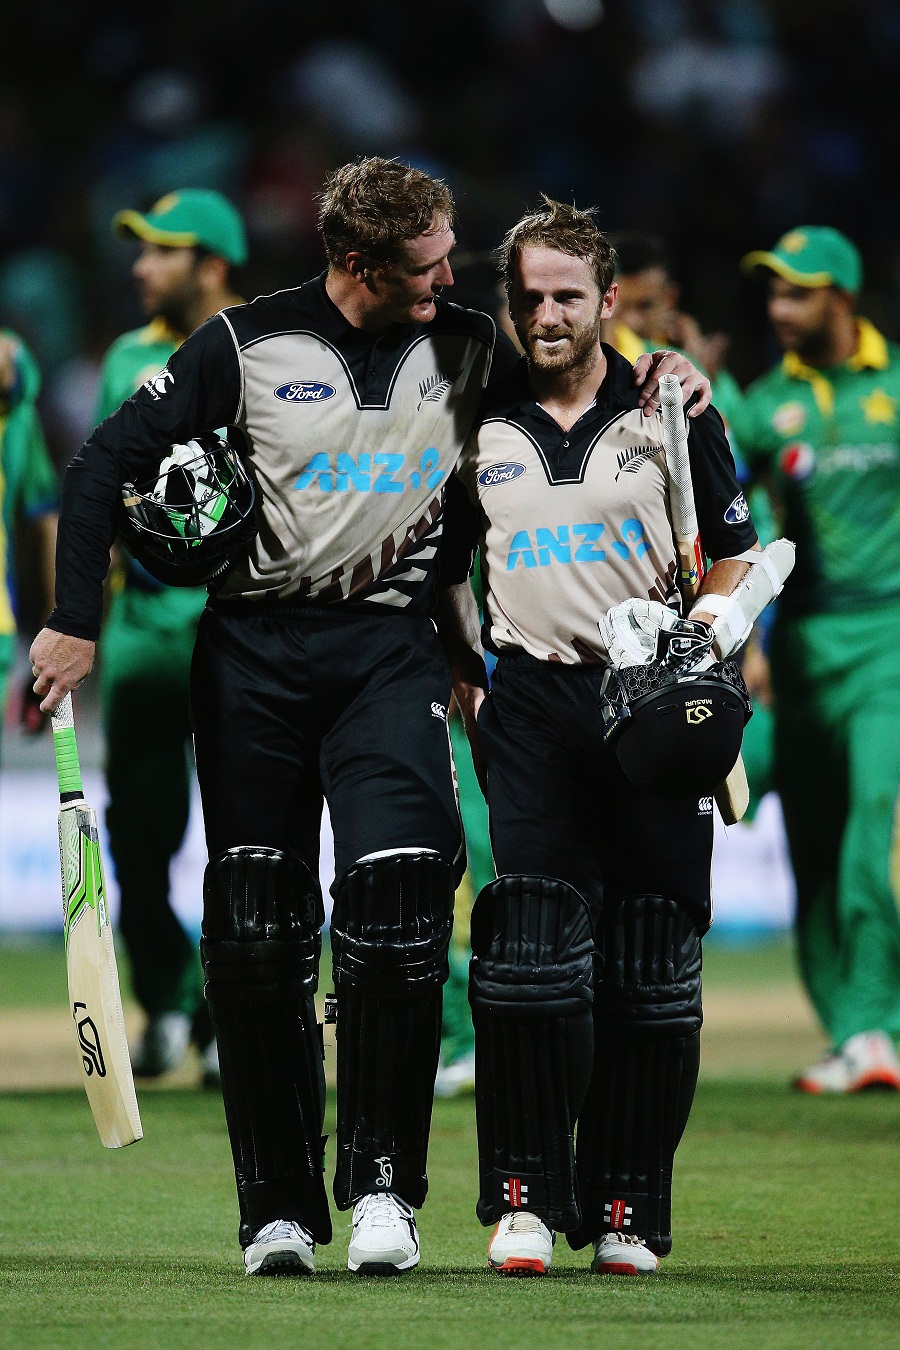 Martin Guptill and Kane Williamson of New Zealand walk off after securing a ten-wicket win against Pakistan in 2nd T20I at Hamilton on Sunday.